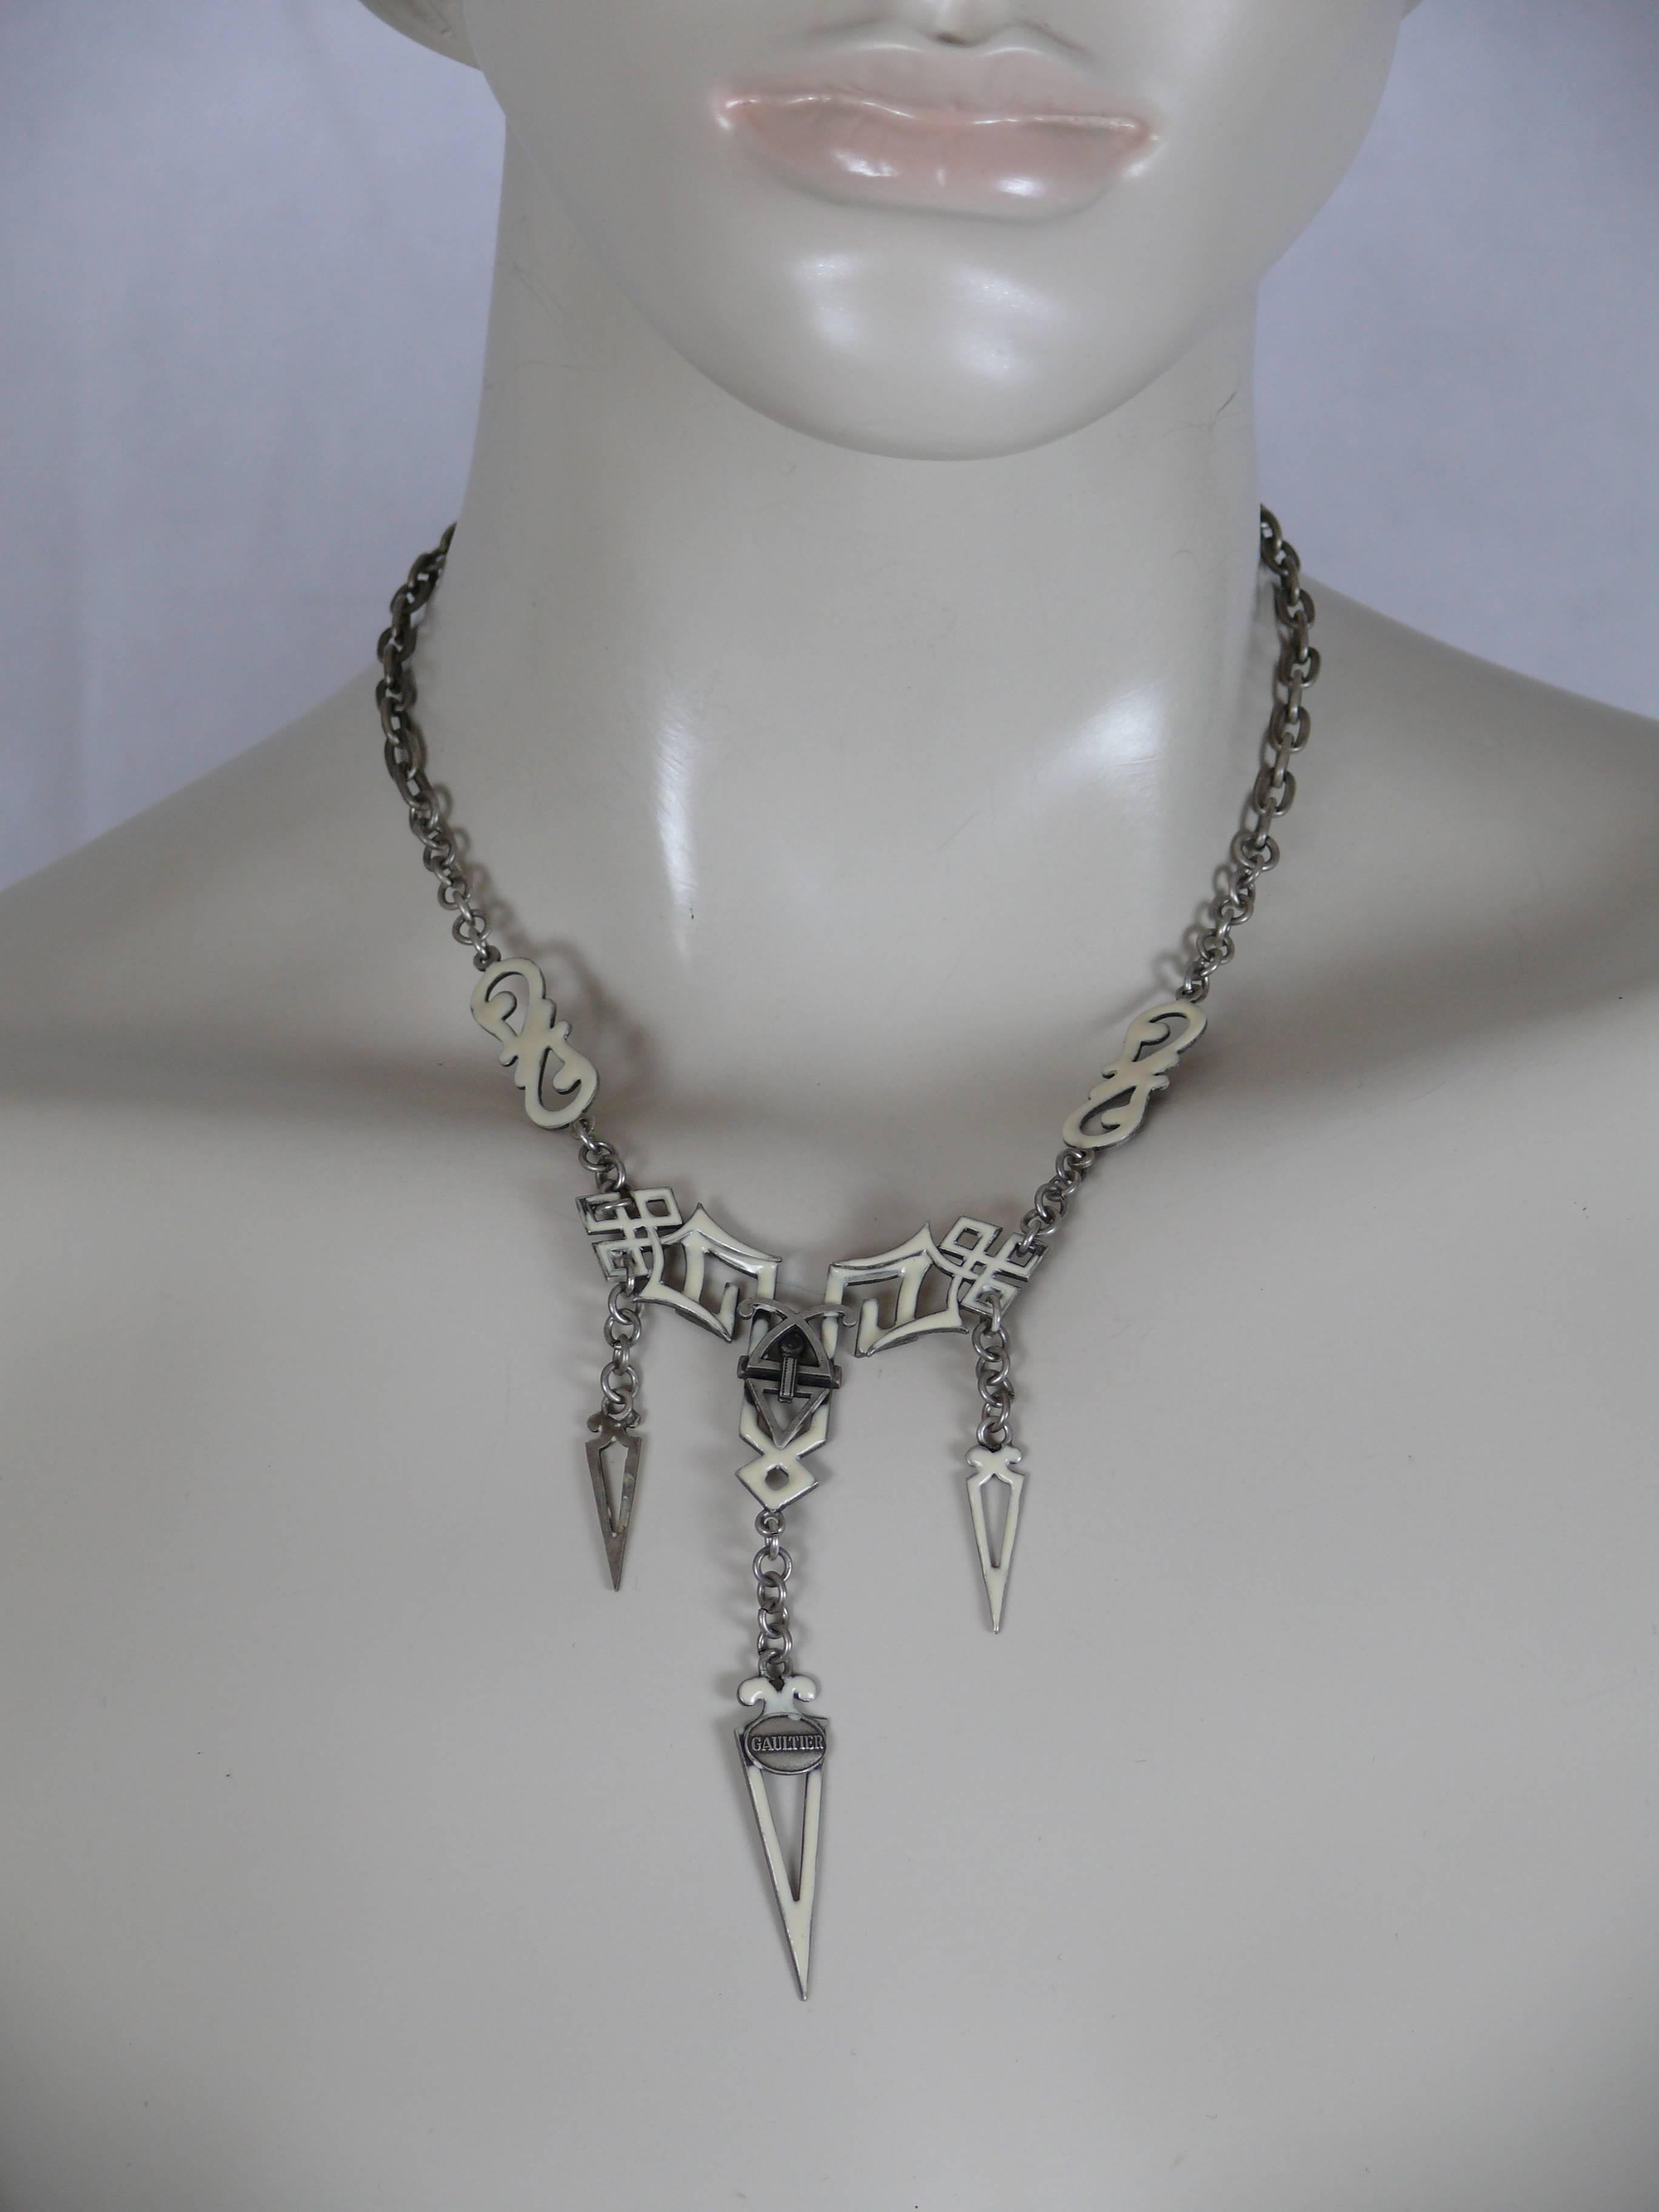 JEAN PAUL GAULTIER vintage celtic pattern design silver tone and off-white enamel necklace.

Marked GAULTIER.

Indicative measurements : total length worn 25.5 cm (10.04 inches).

Comes with original dust bag.

JEWELRY CONDITION CHART
- New